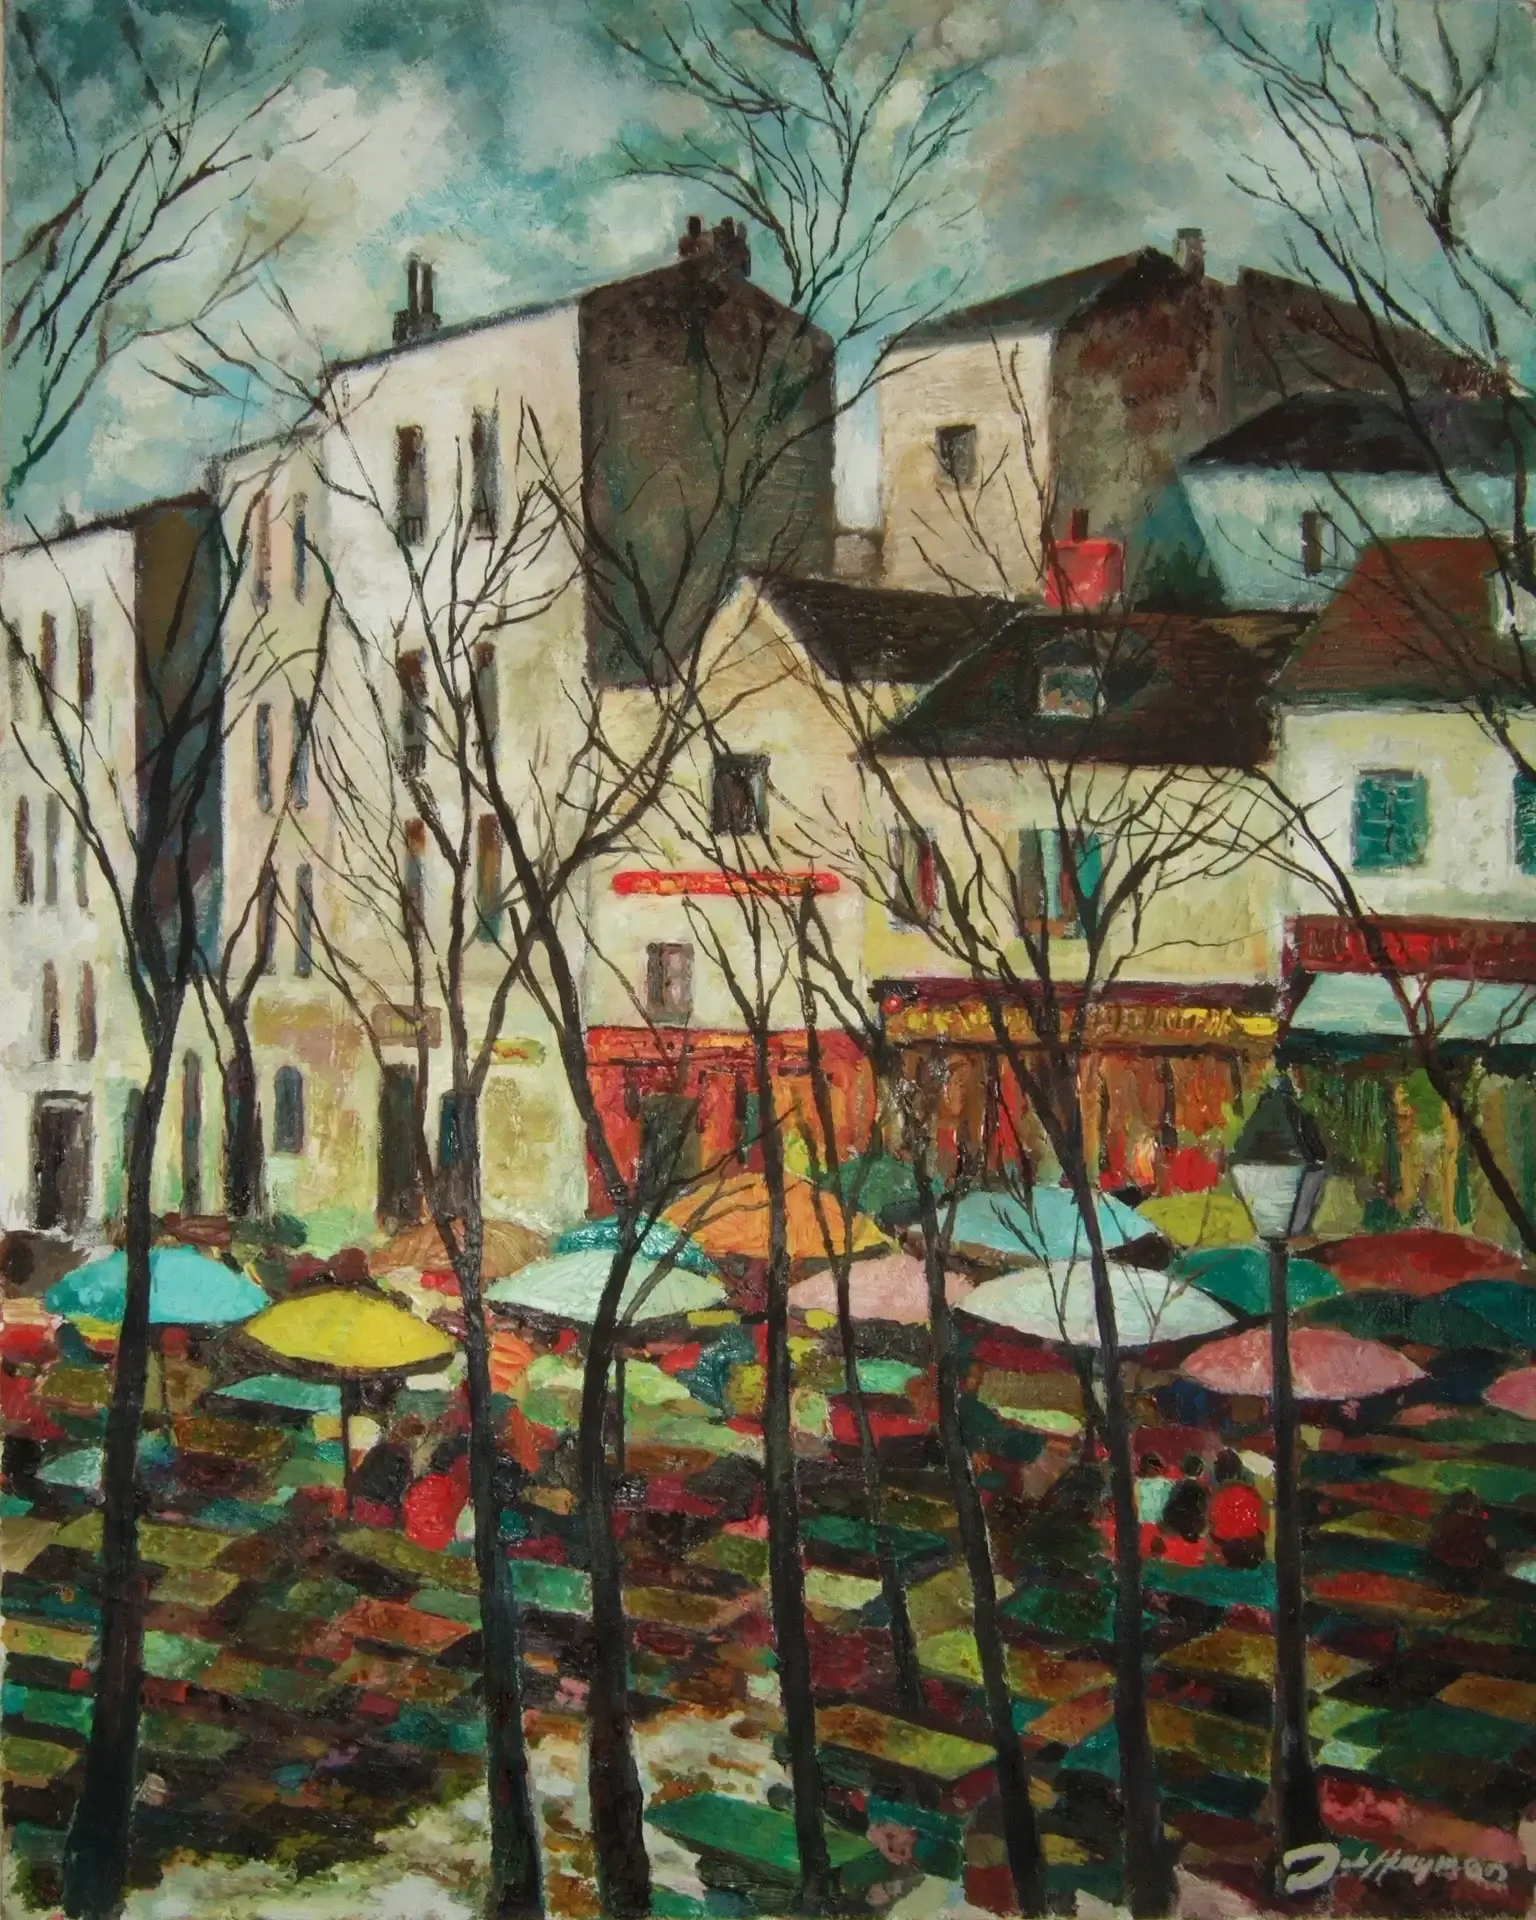 A painting of trees and buildings with umbrellas